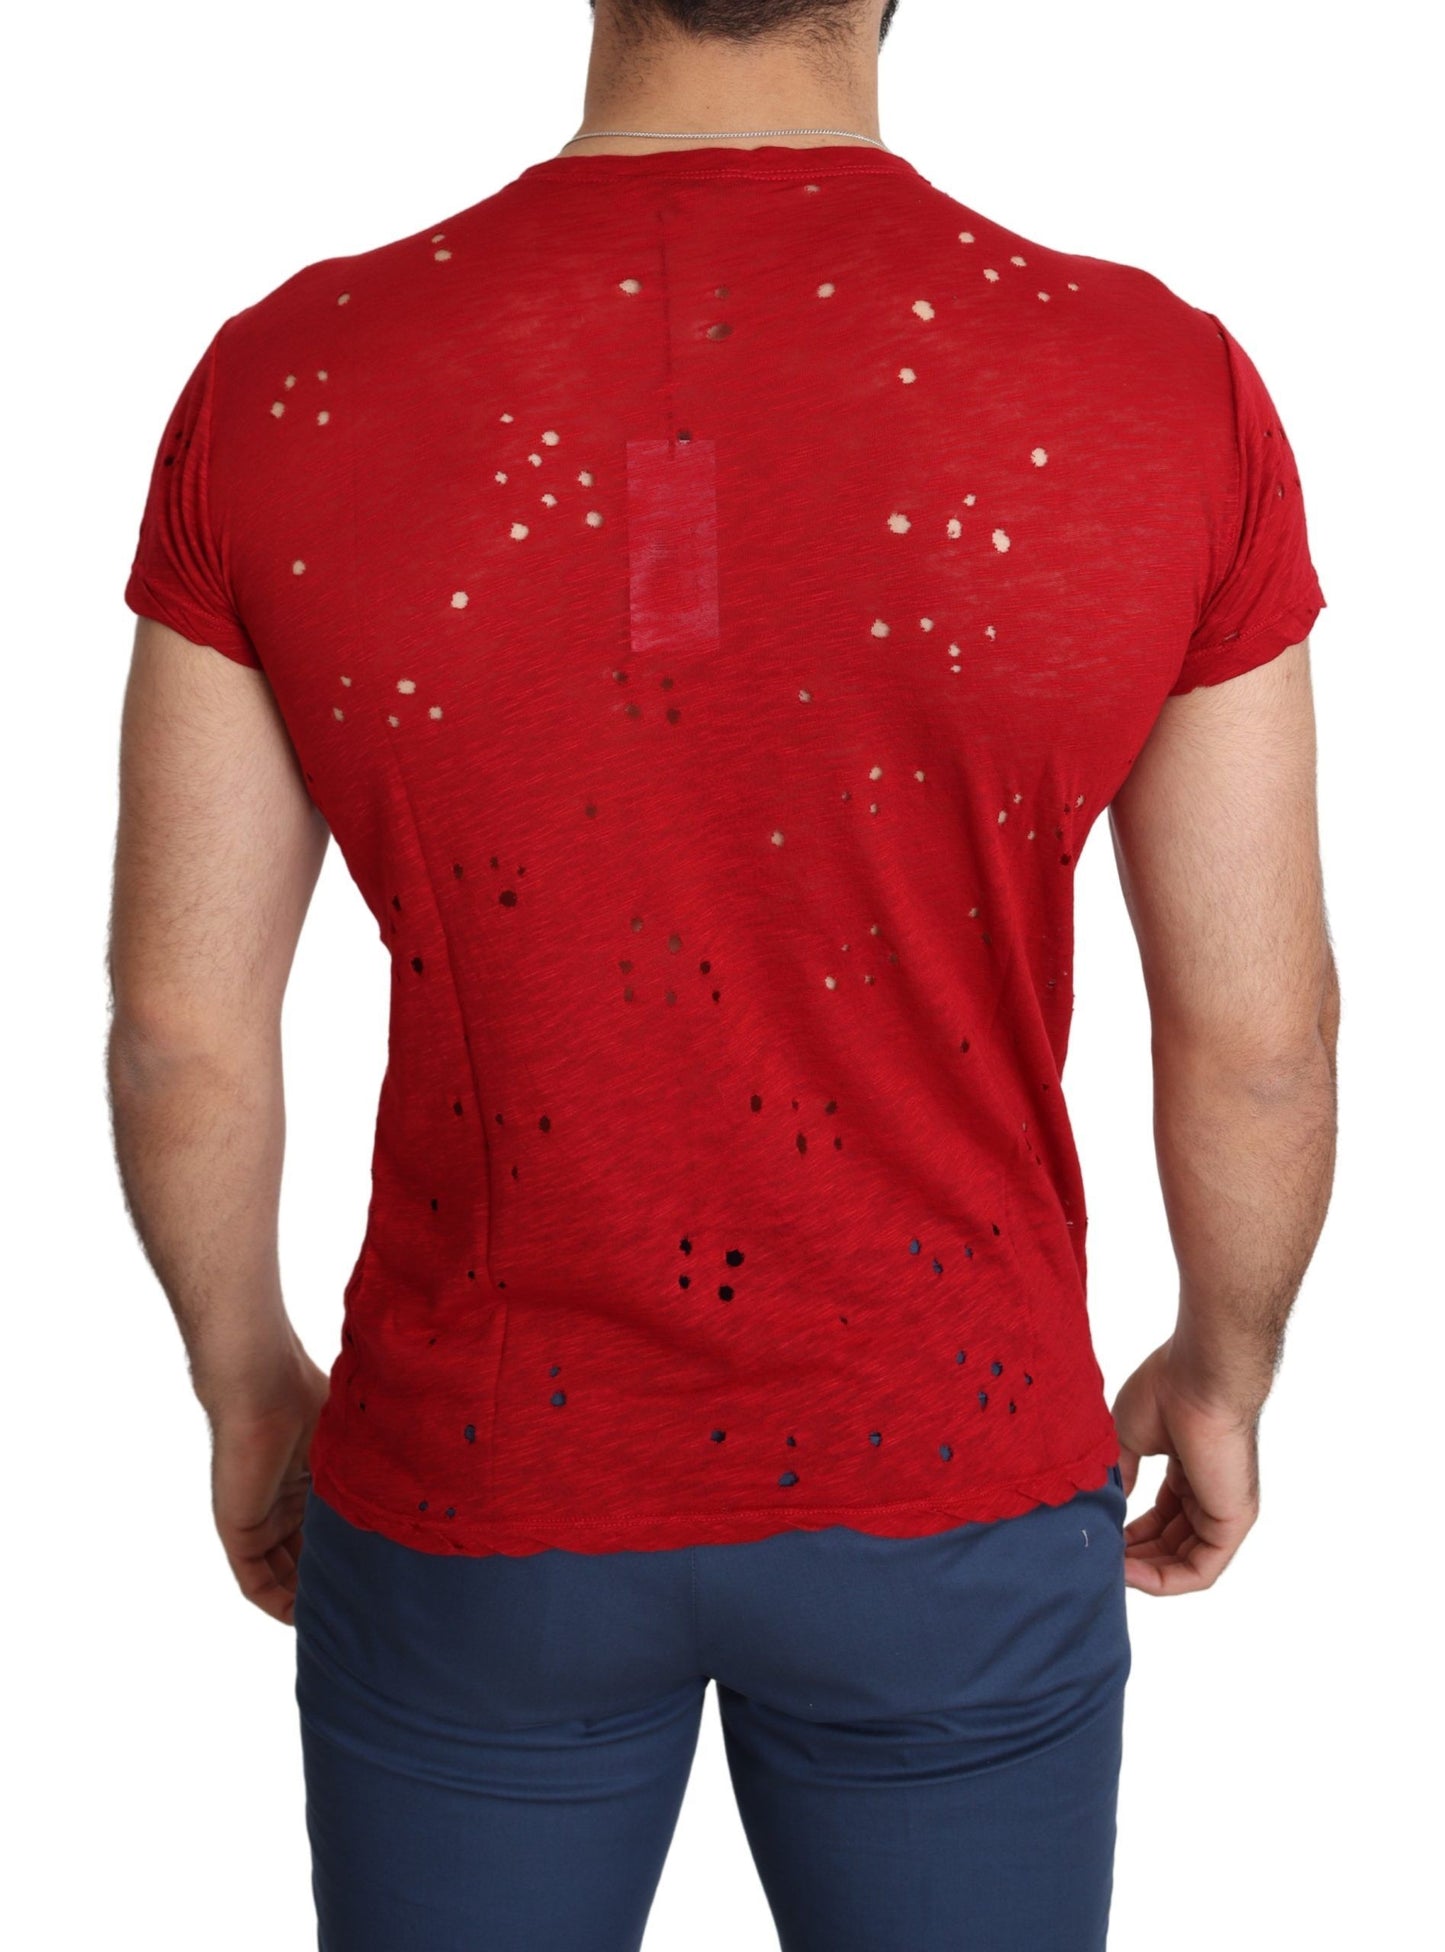 Radiant Red Cotton Tee Perfect For Everyday Style